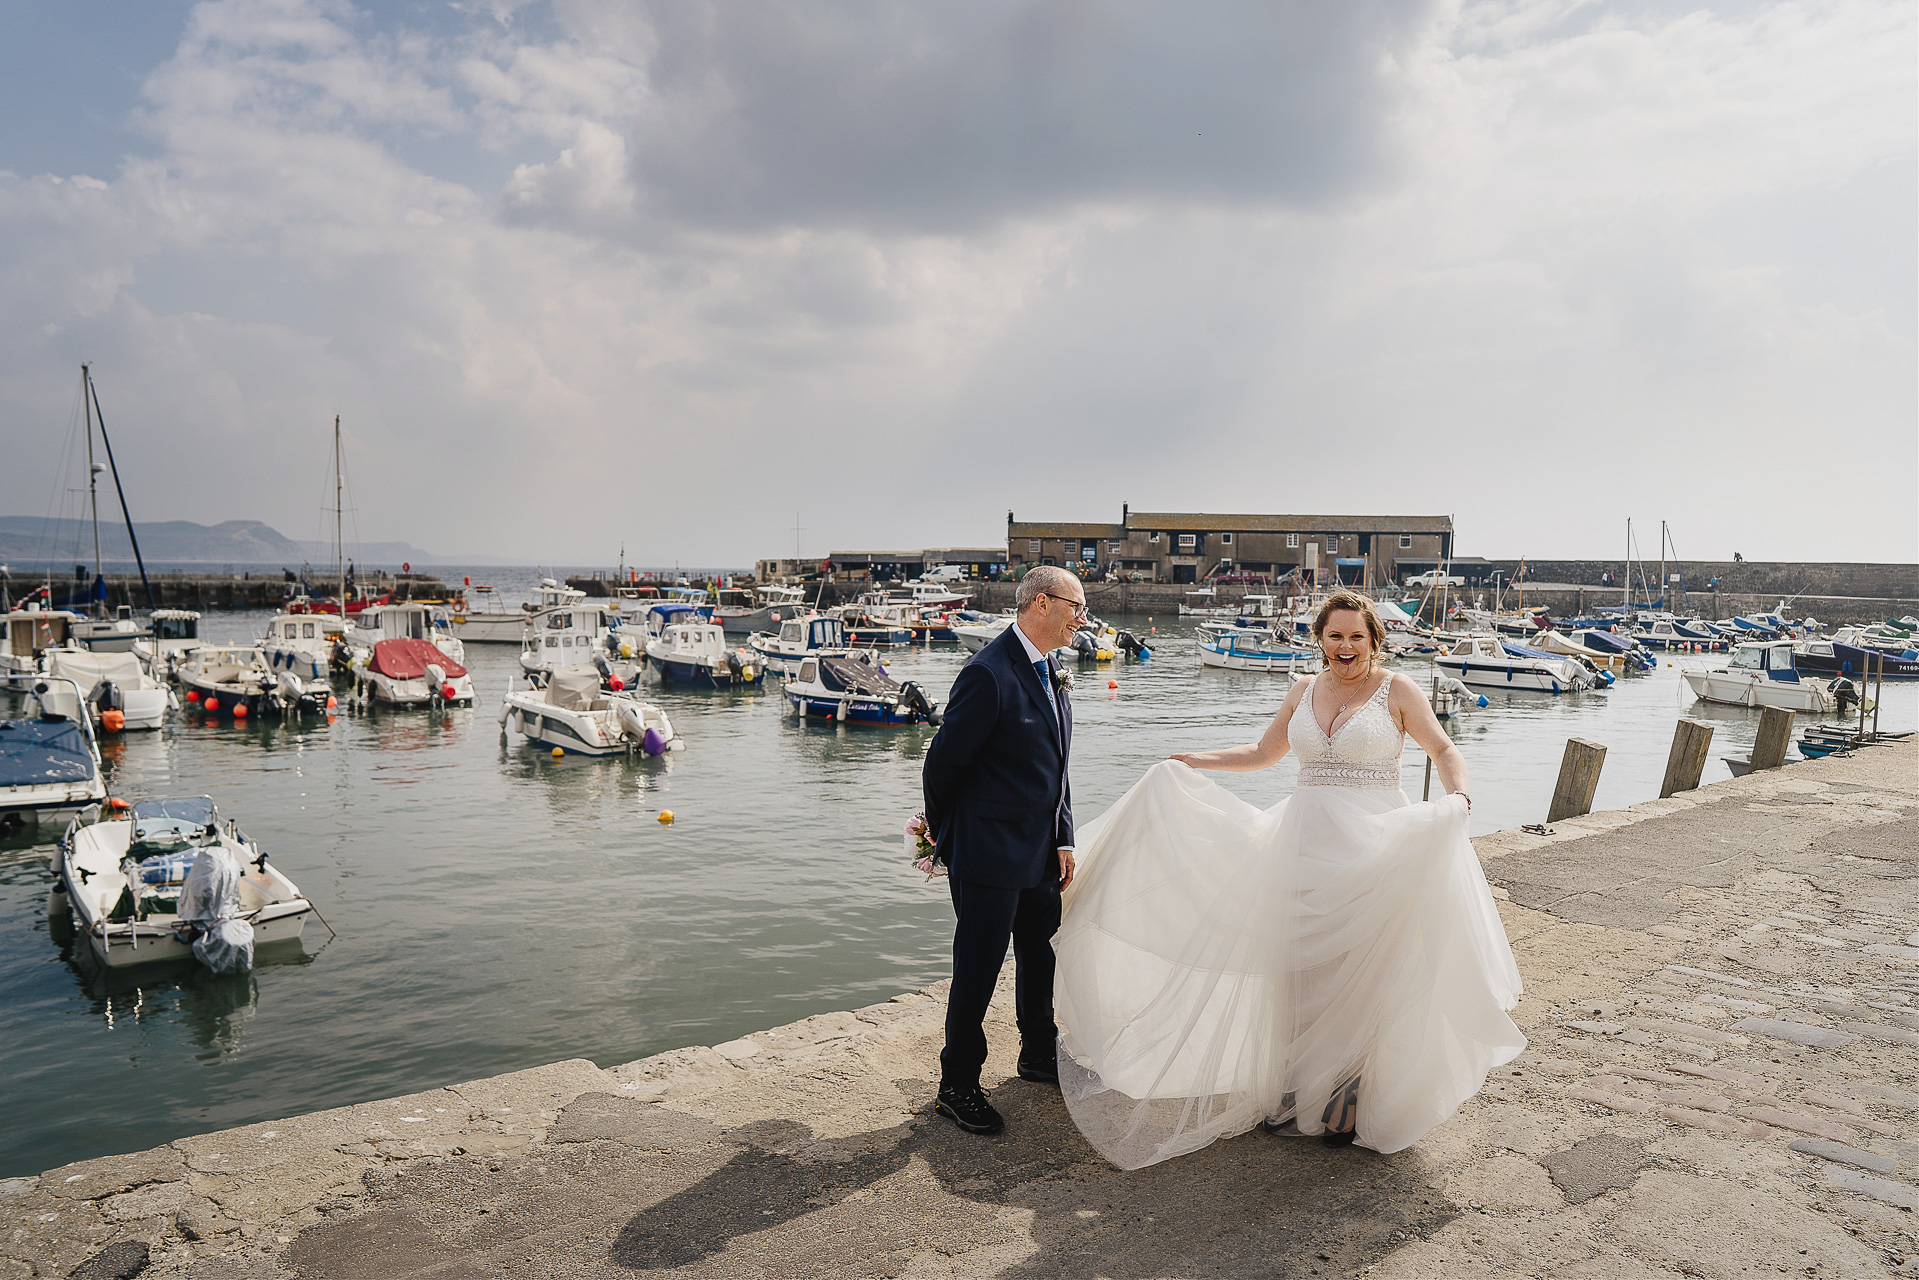 Elopement wedding by the sea, bride and groom laughing with boats in the harbour behind them